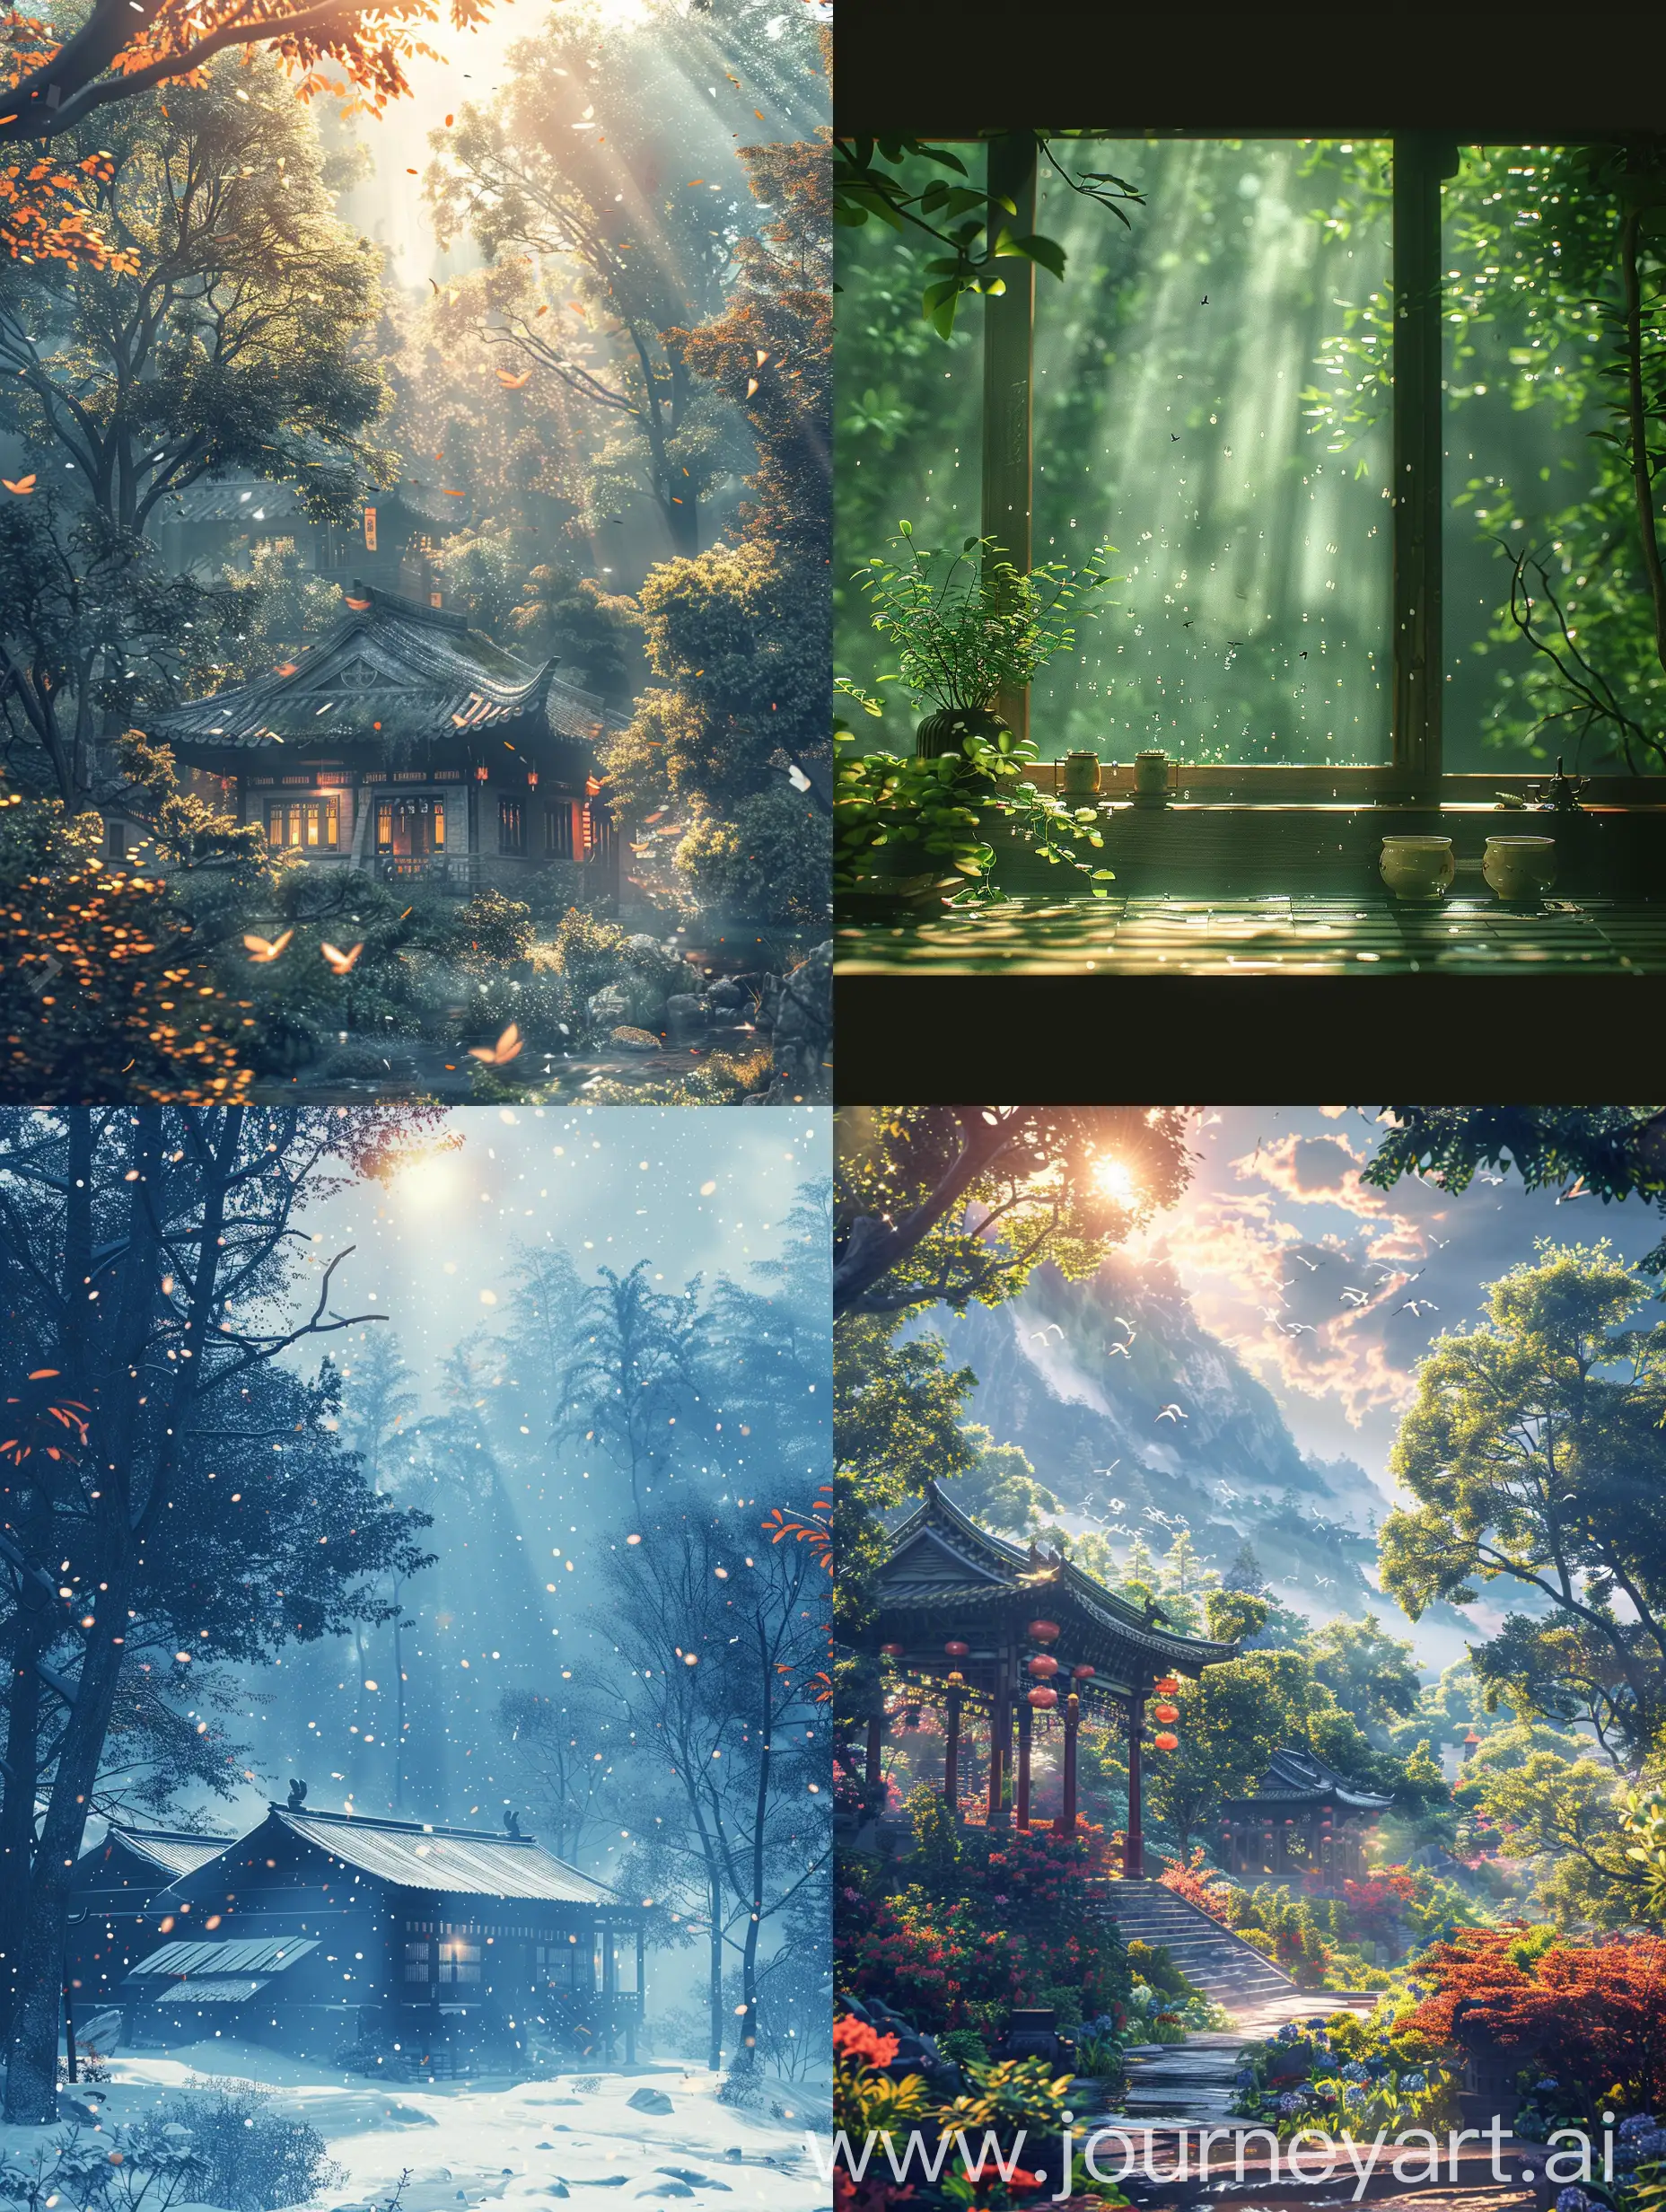 Poetic-Chinese-Ancient-Manor-Scene-Dreamy-Minimalist-Aesthetic-with-Surreal-Elements